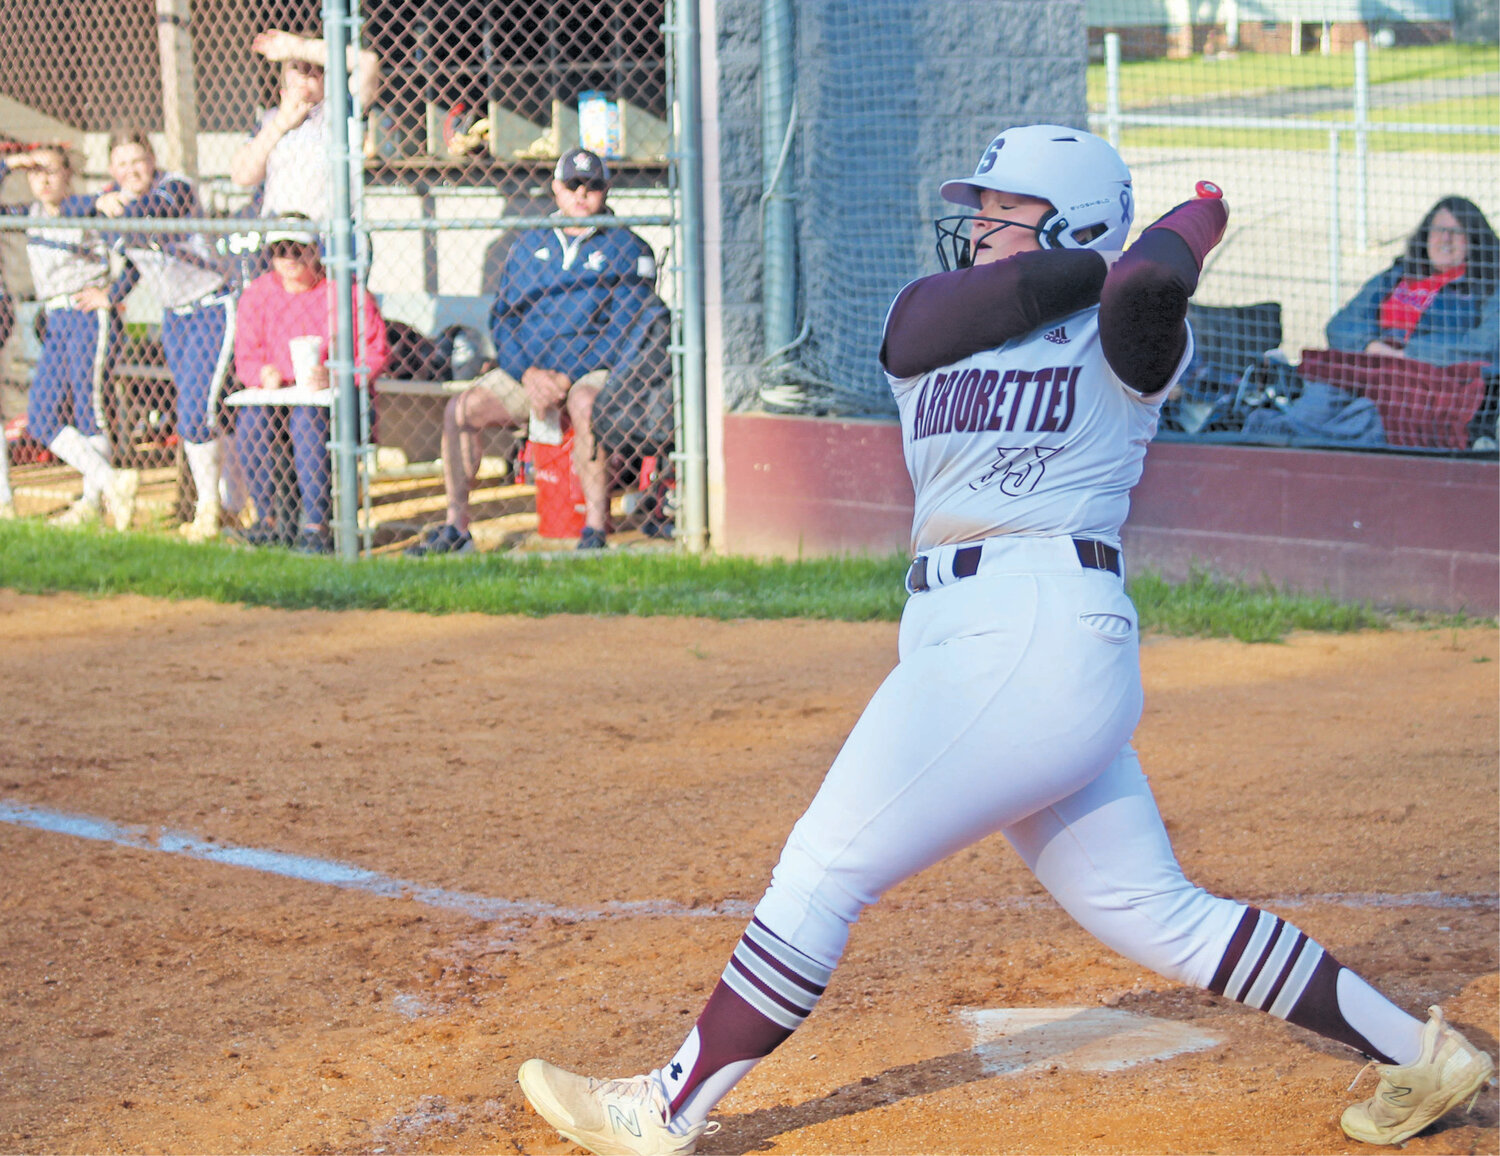 Abby Guy goes up to bat during the White County High School softball game against Cookeville.